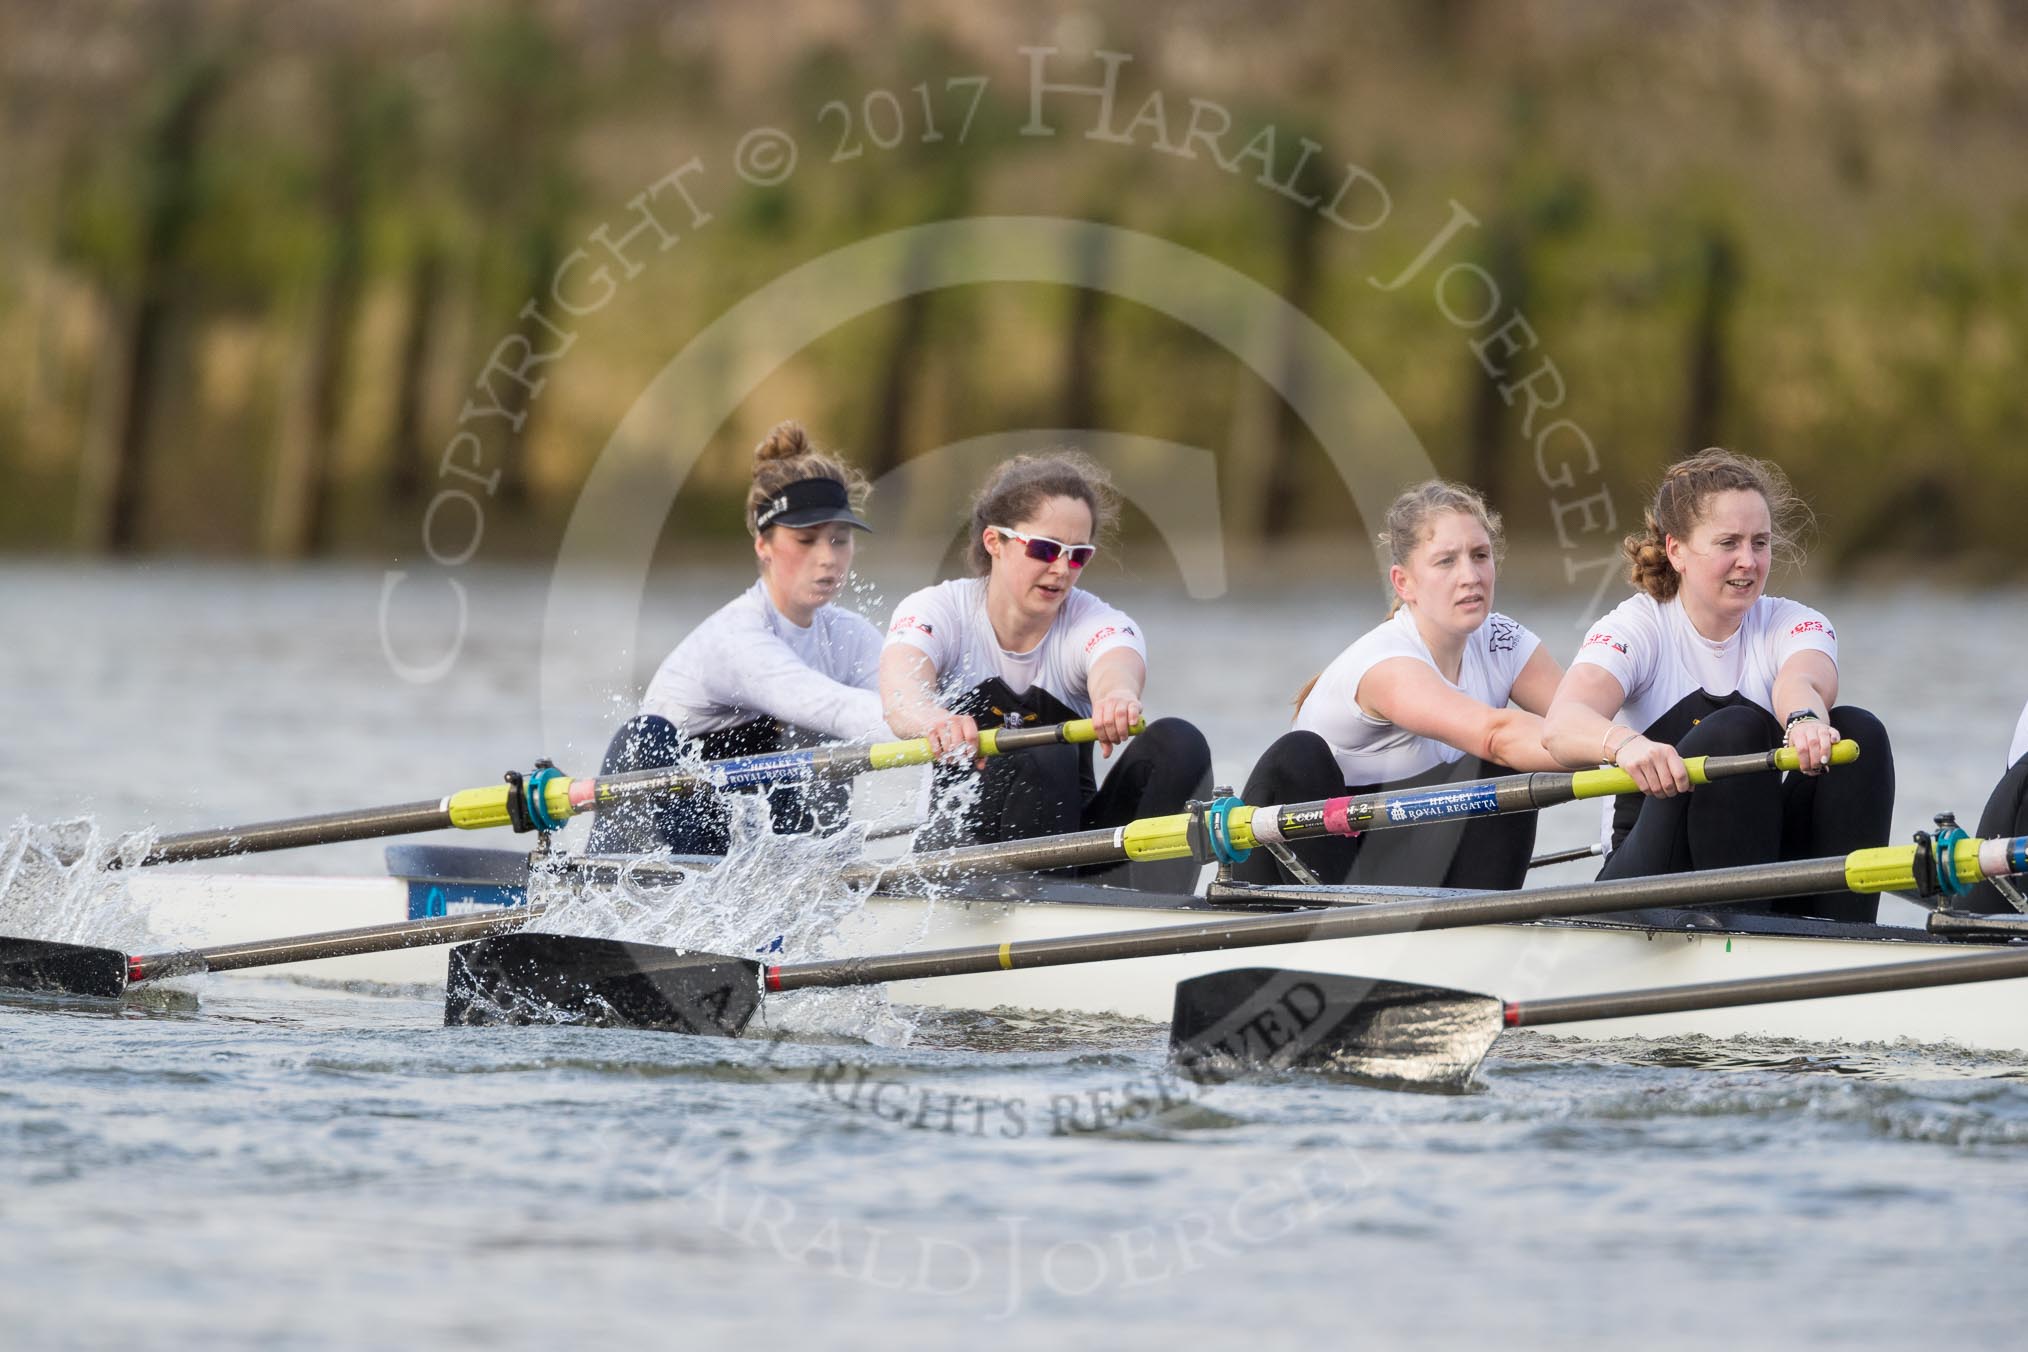 The Cancer Research UK Boat Race season 2017 - Women's Boat Race Fixture OUWBC vs Molesey BC: The Molesey boat, here bow Emma McDonald, 2 Caitlin Boyland, 3 Lucy Primmer, 4 Claire McKeown.
River Thames between Putney Bridge and Mortlake,
London SW15,

United Kingdom,
on 19 March 2017 at 16:06, image #94